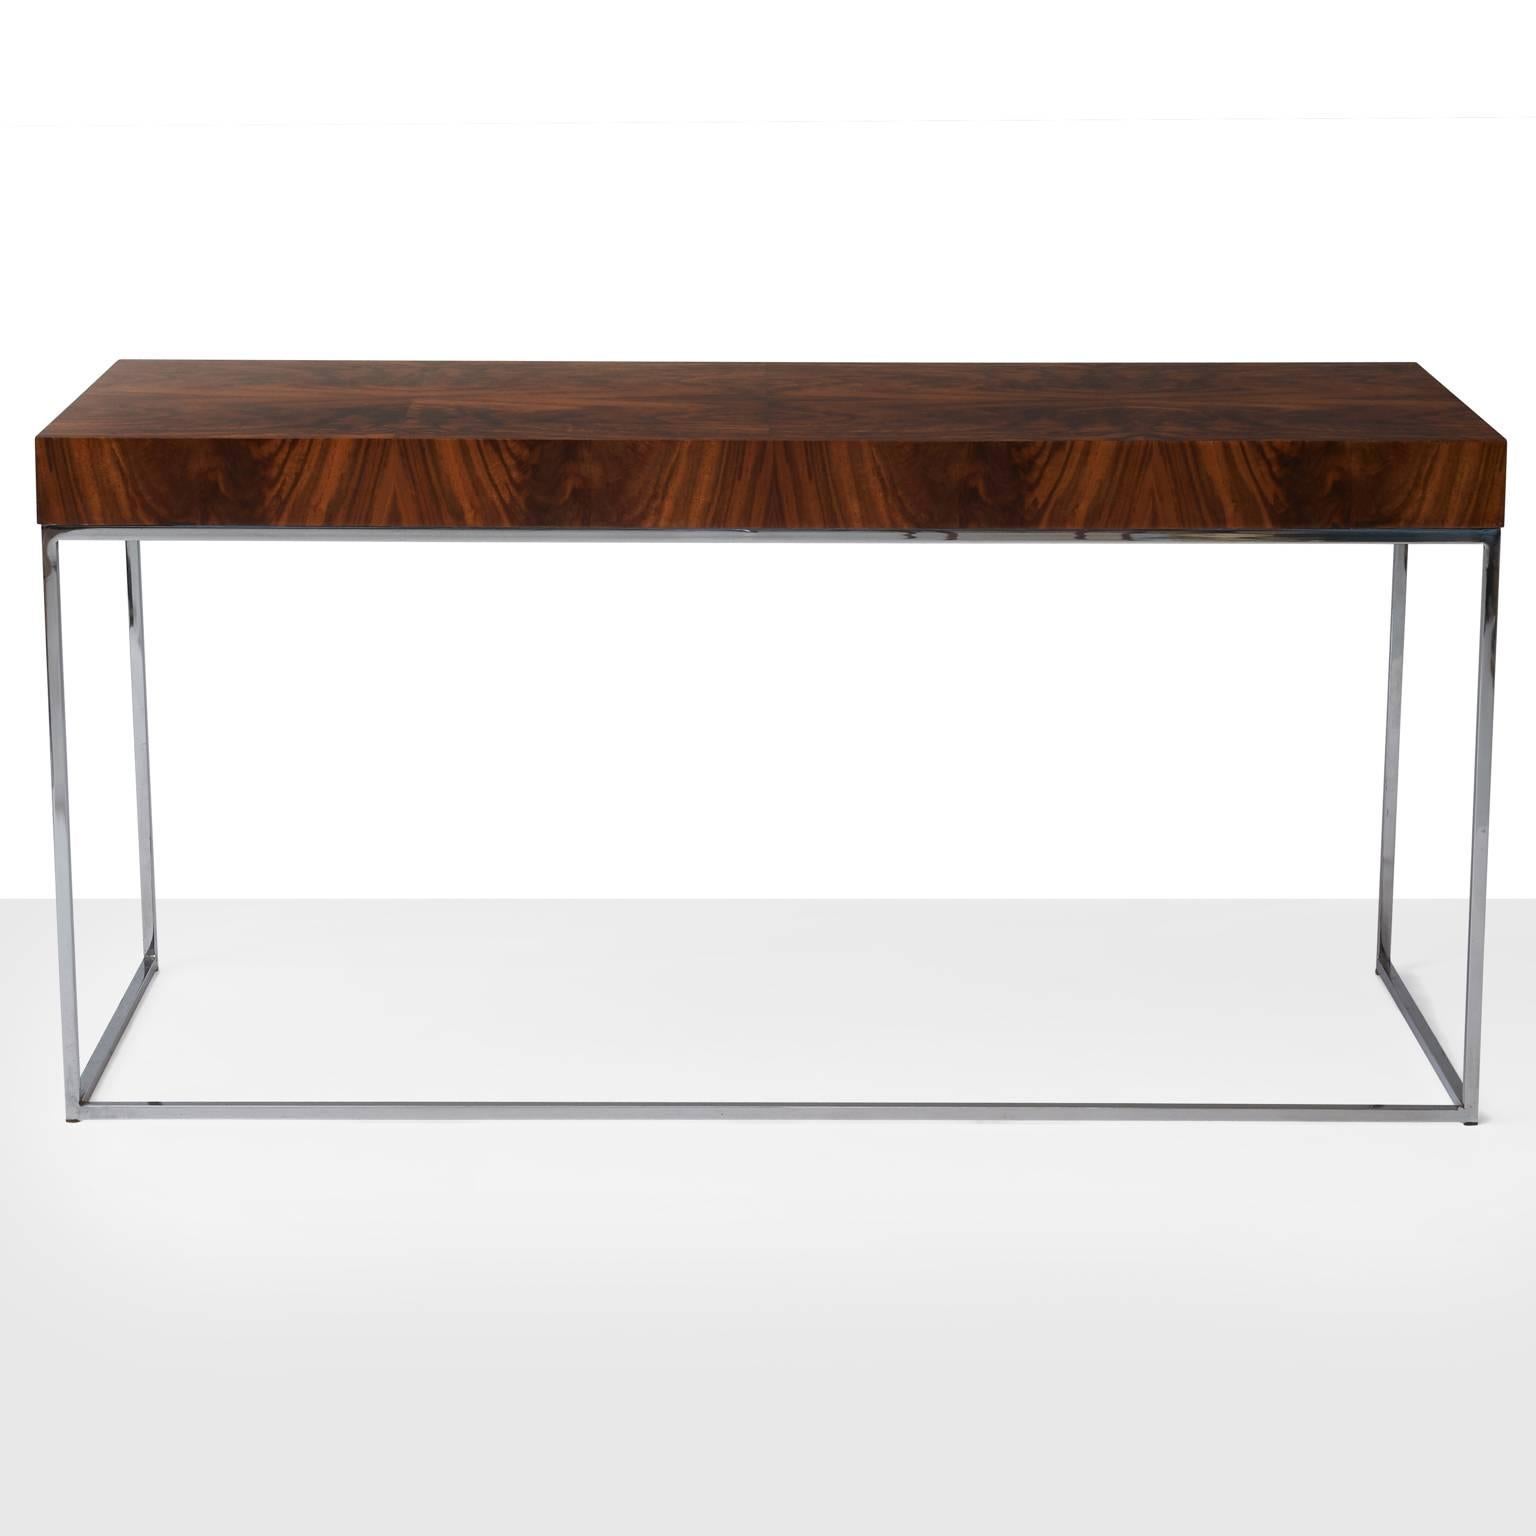 A desk or writing table by Milo Baughman. Bookmatched rosewood surface set atop a slender frame of chromed steel.
 